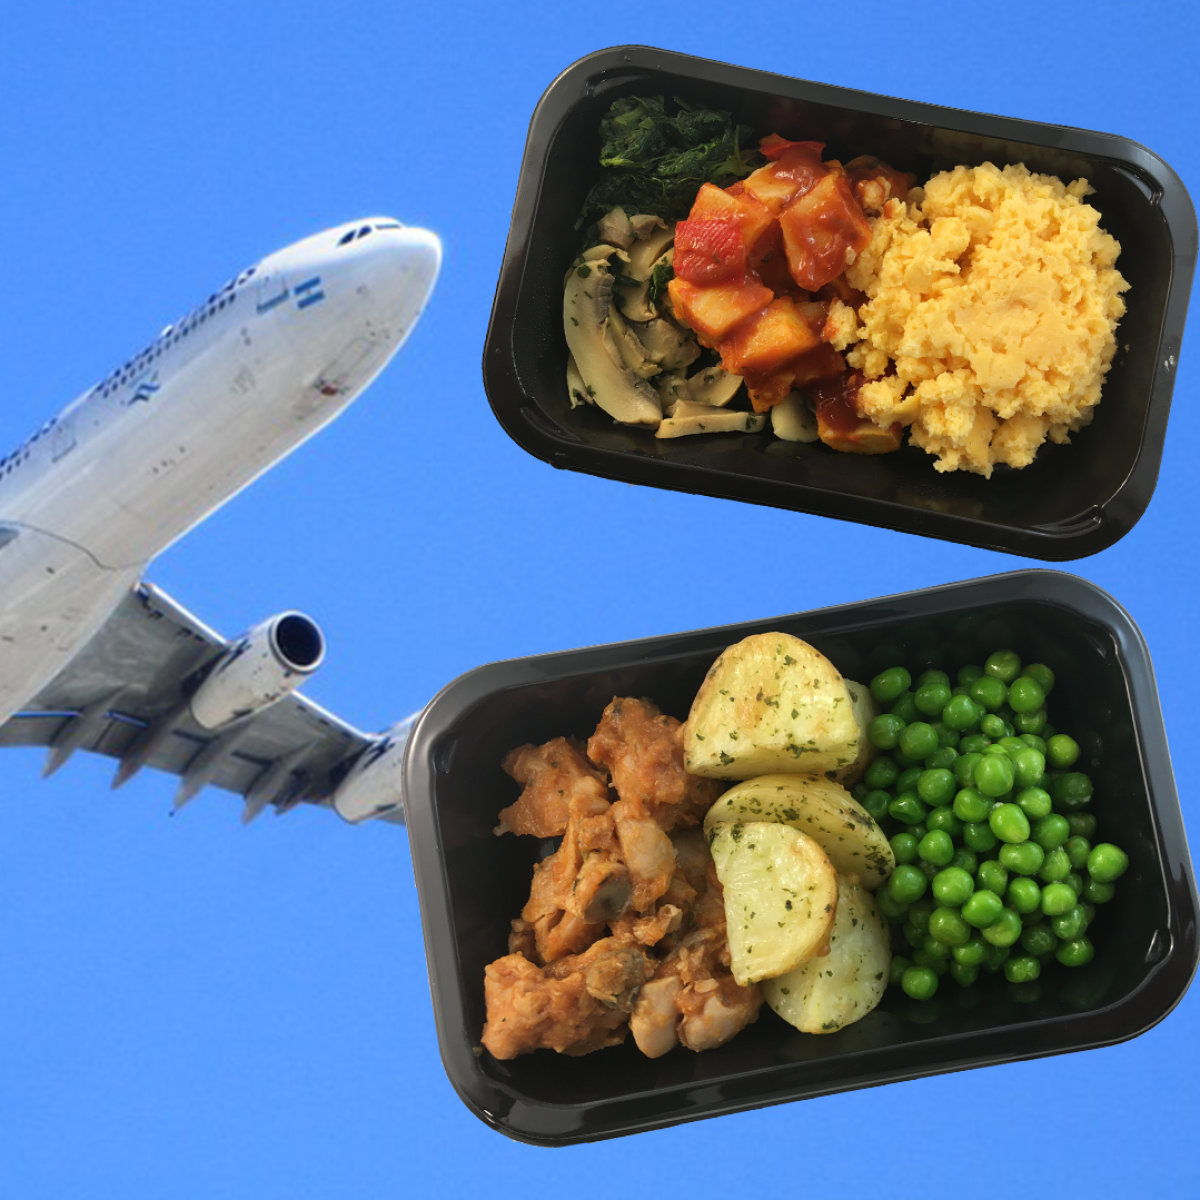 Having Travel Withdrawals You Can Now Buy Plane Food For As Little As 2